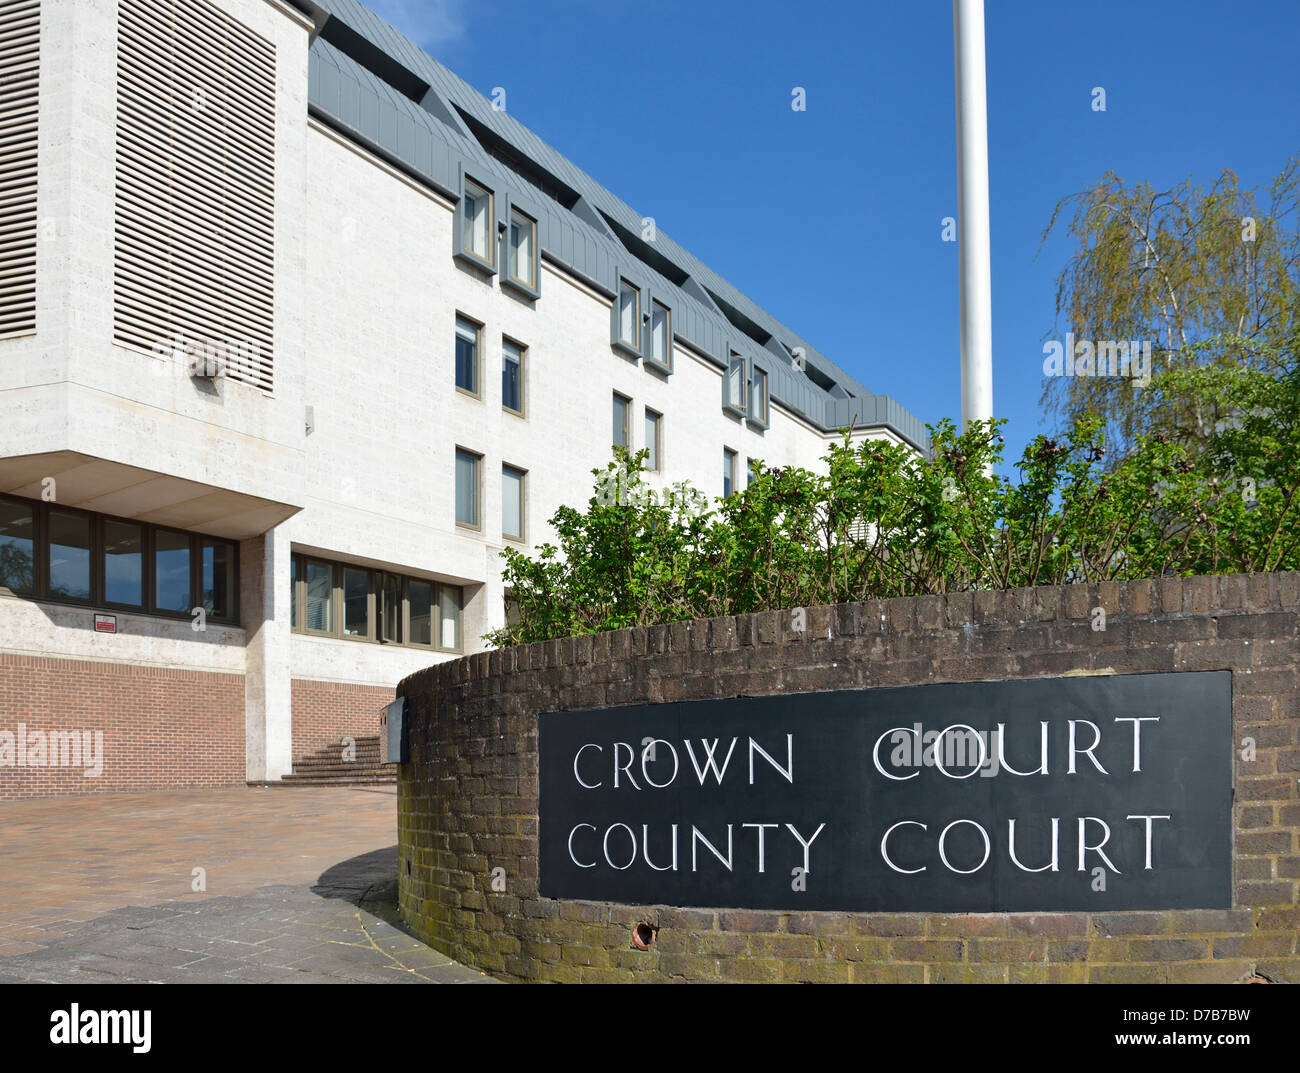 Maidstone, Kent, England, UK. The Law Courts; Crown Court / County Court. Stock Photo